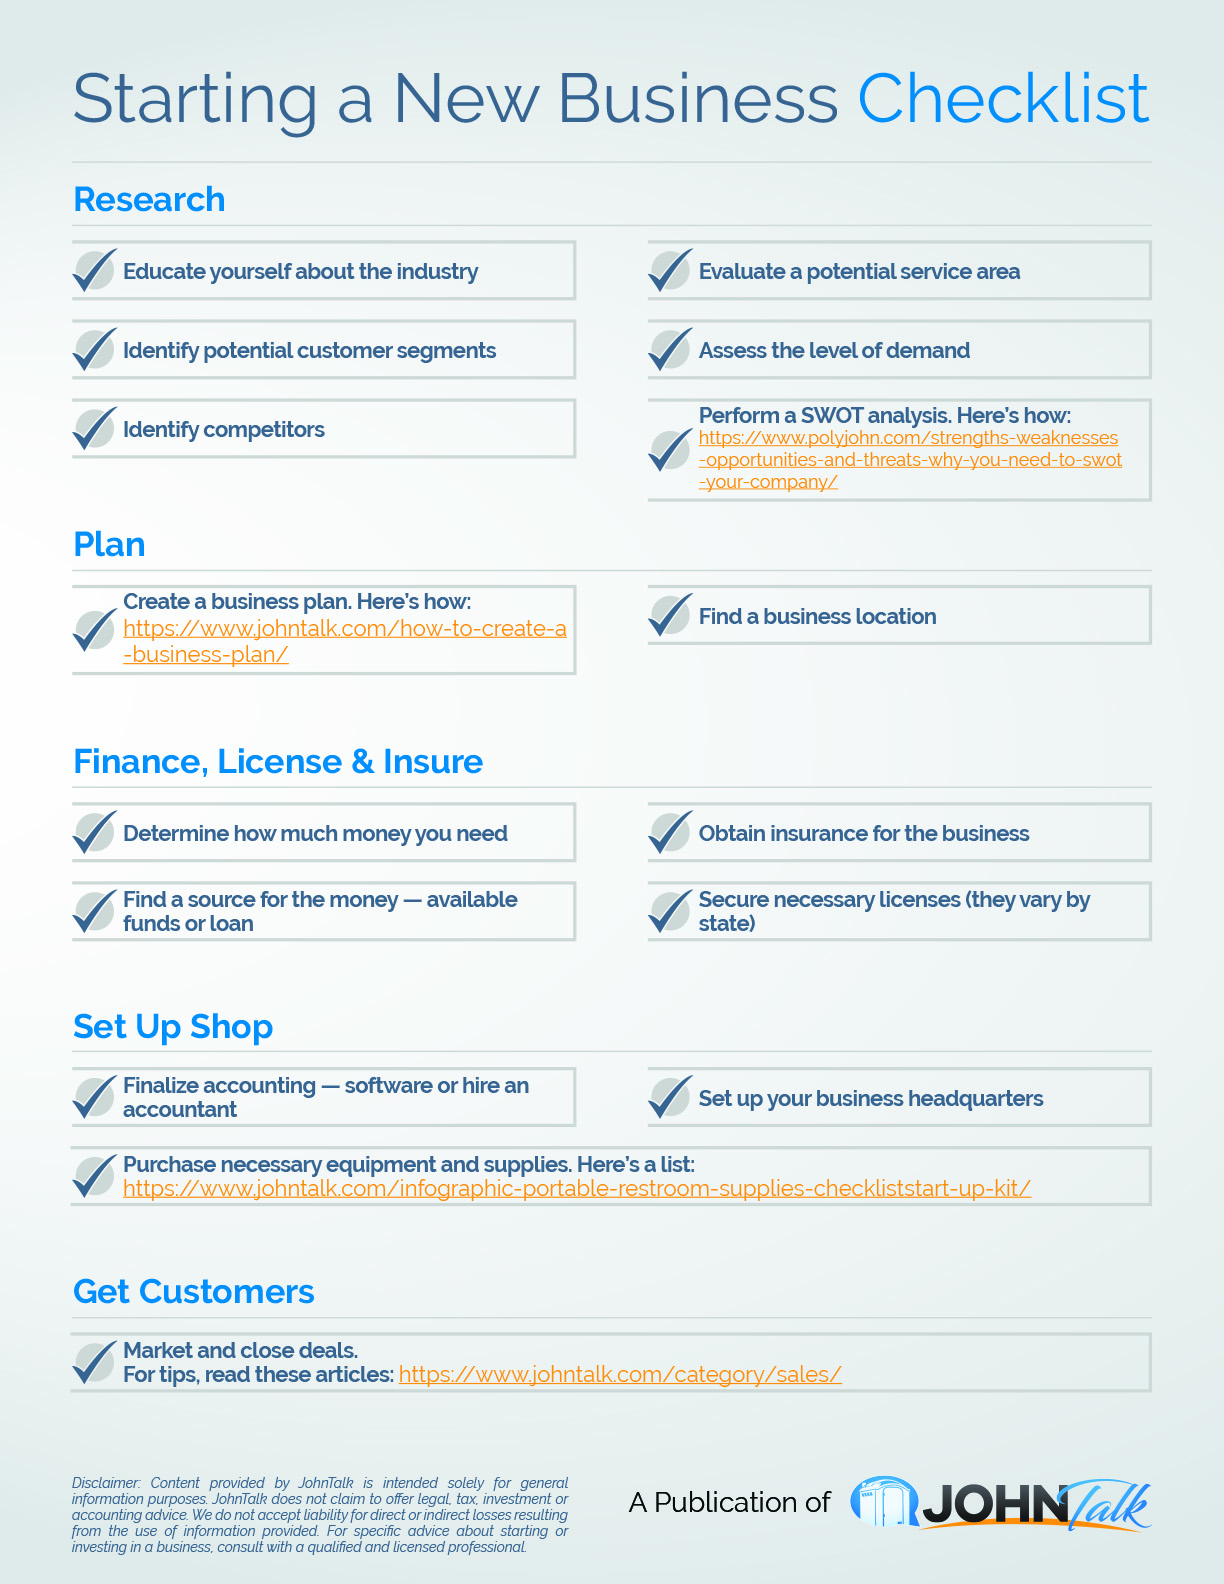 INFOGRAPHIC: Starting a New Business Checklist - JohnTalk